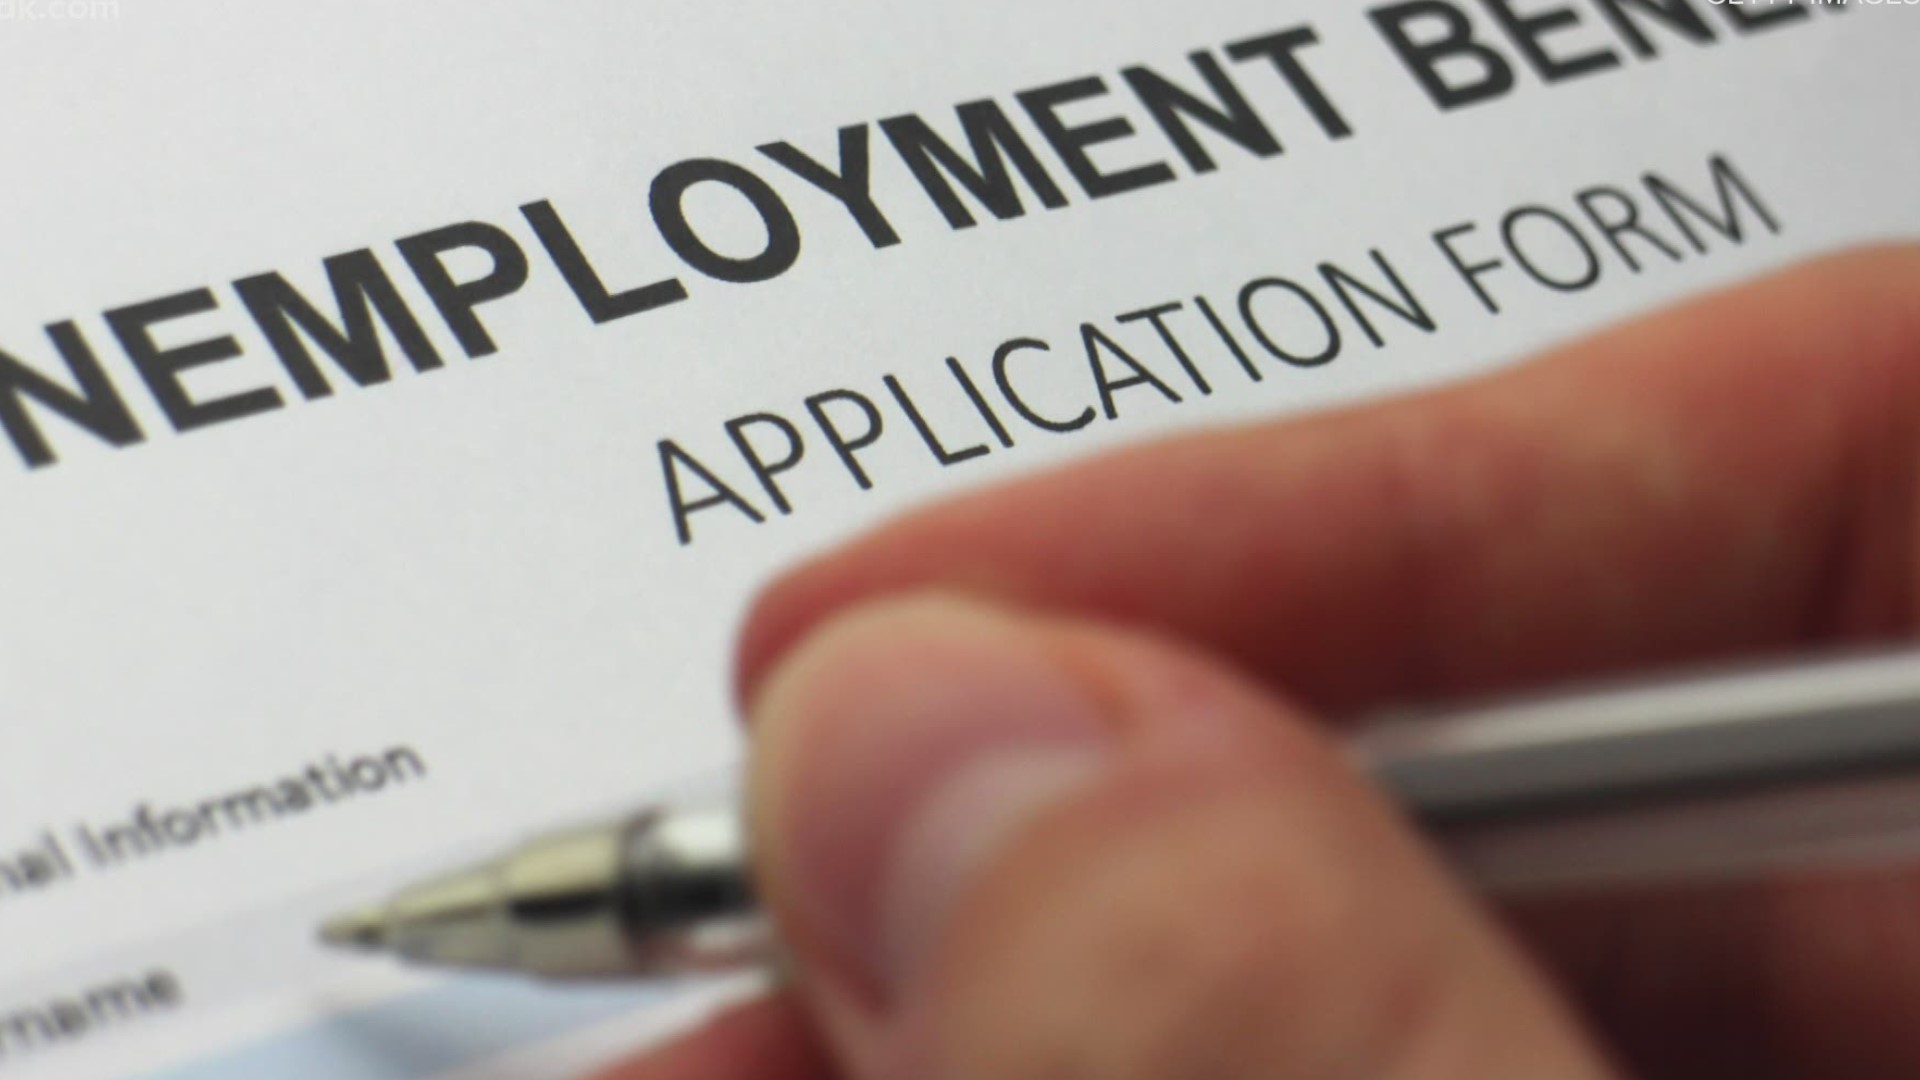 If you got unemployed this year, you may have a larger tax payment due.